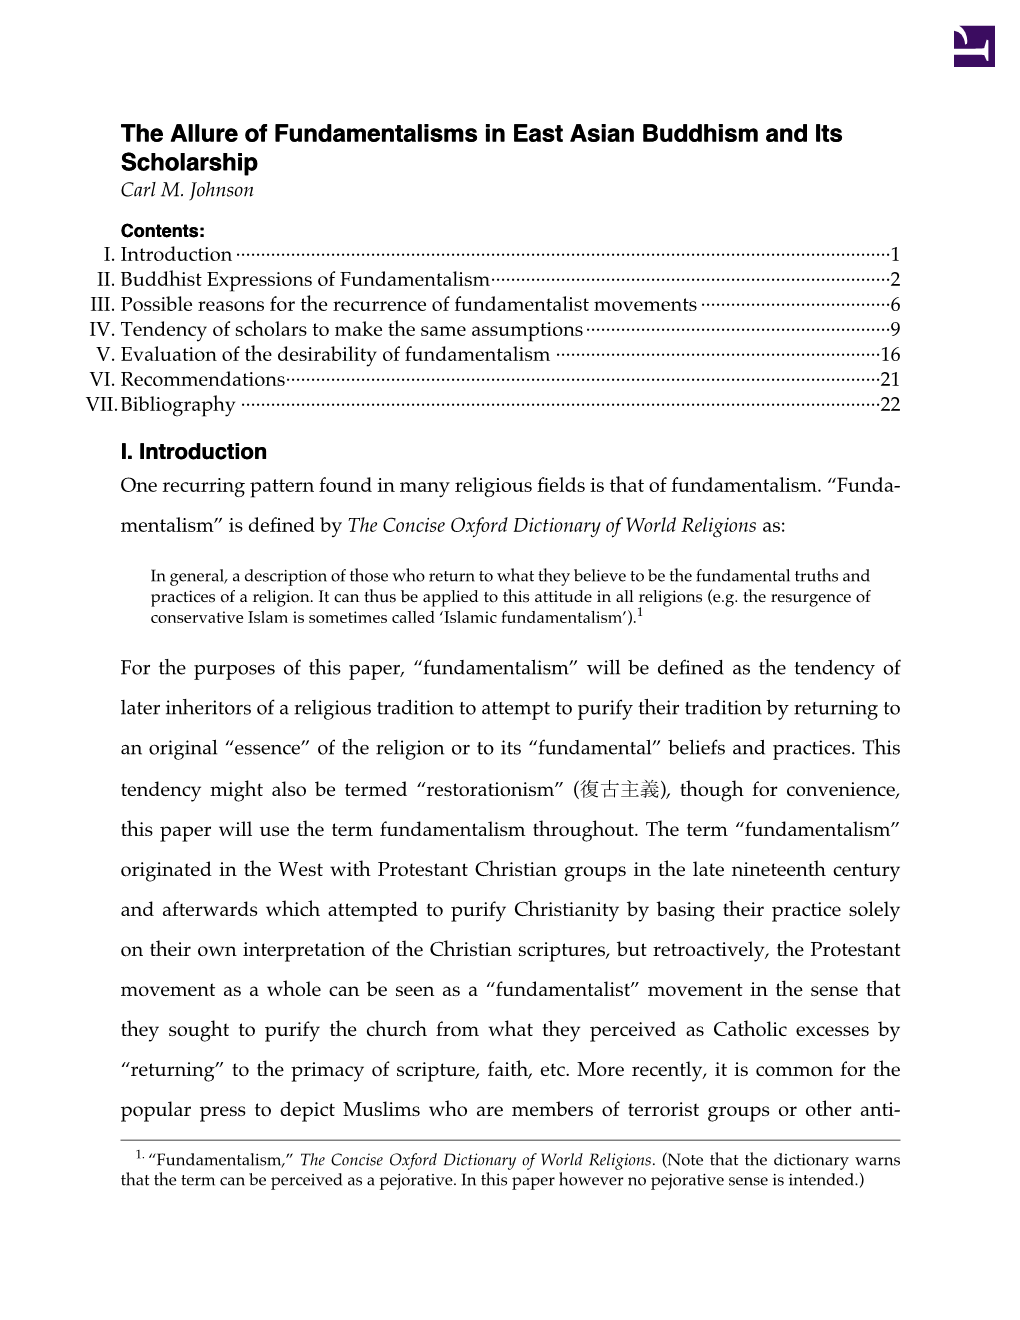 The Allure of Fundamentalisms in East Asian Buddhism and Its Scholarship Carl M